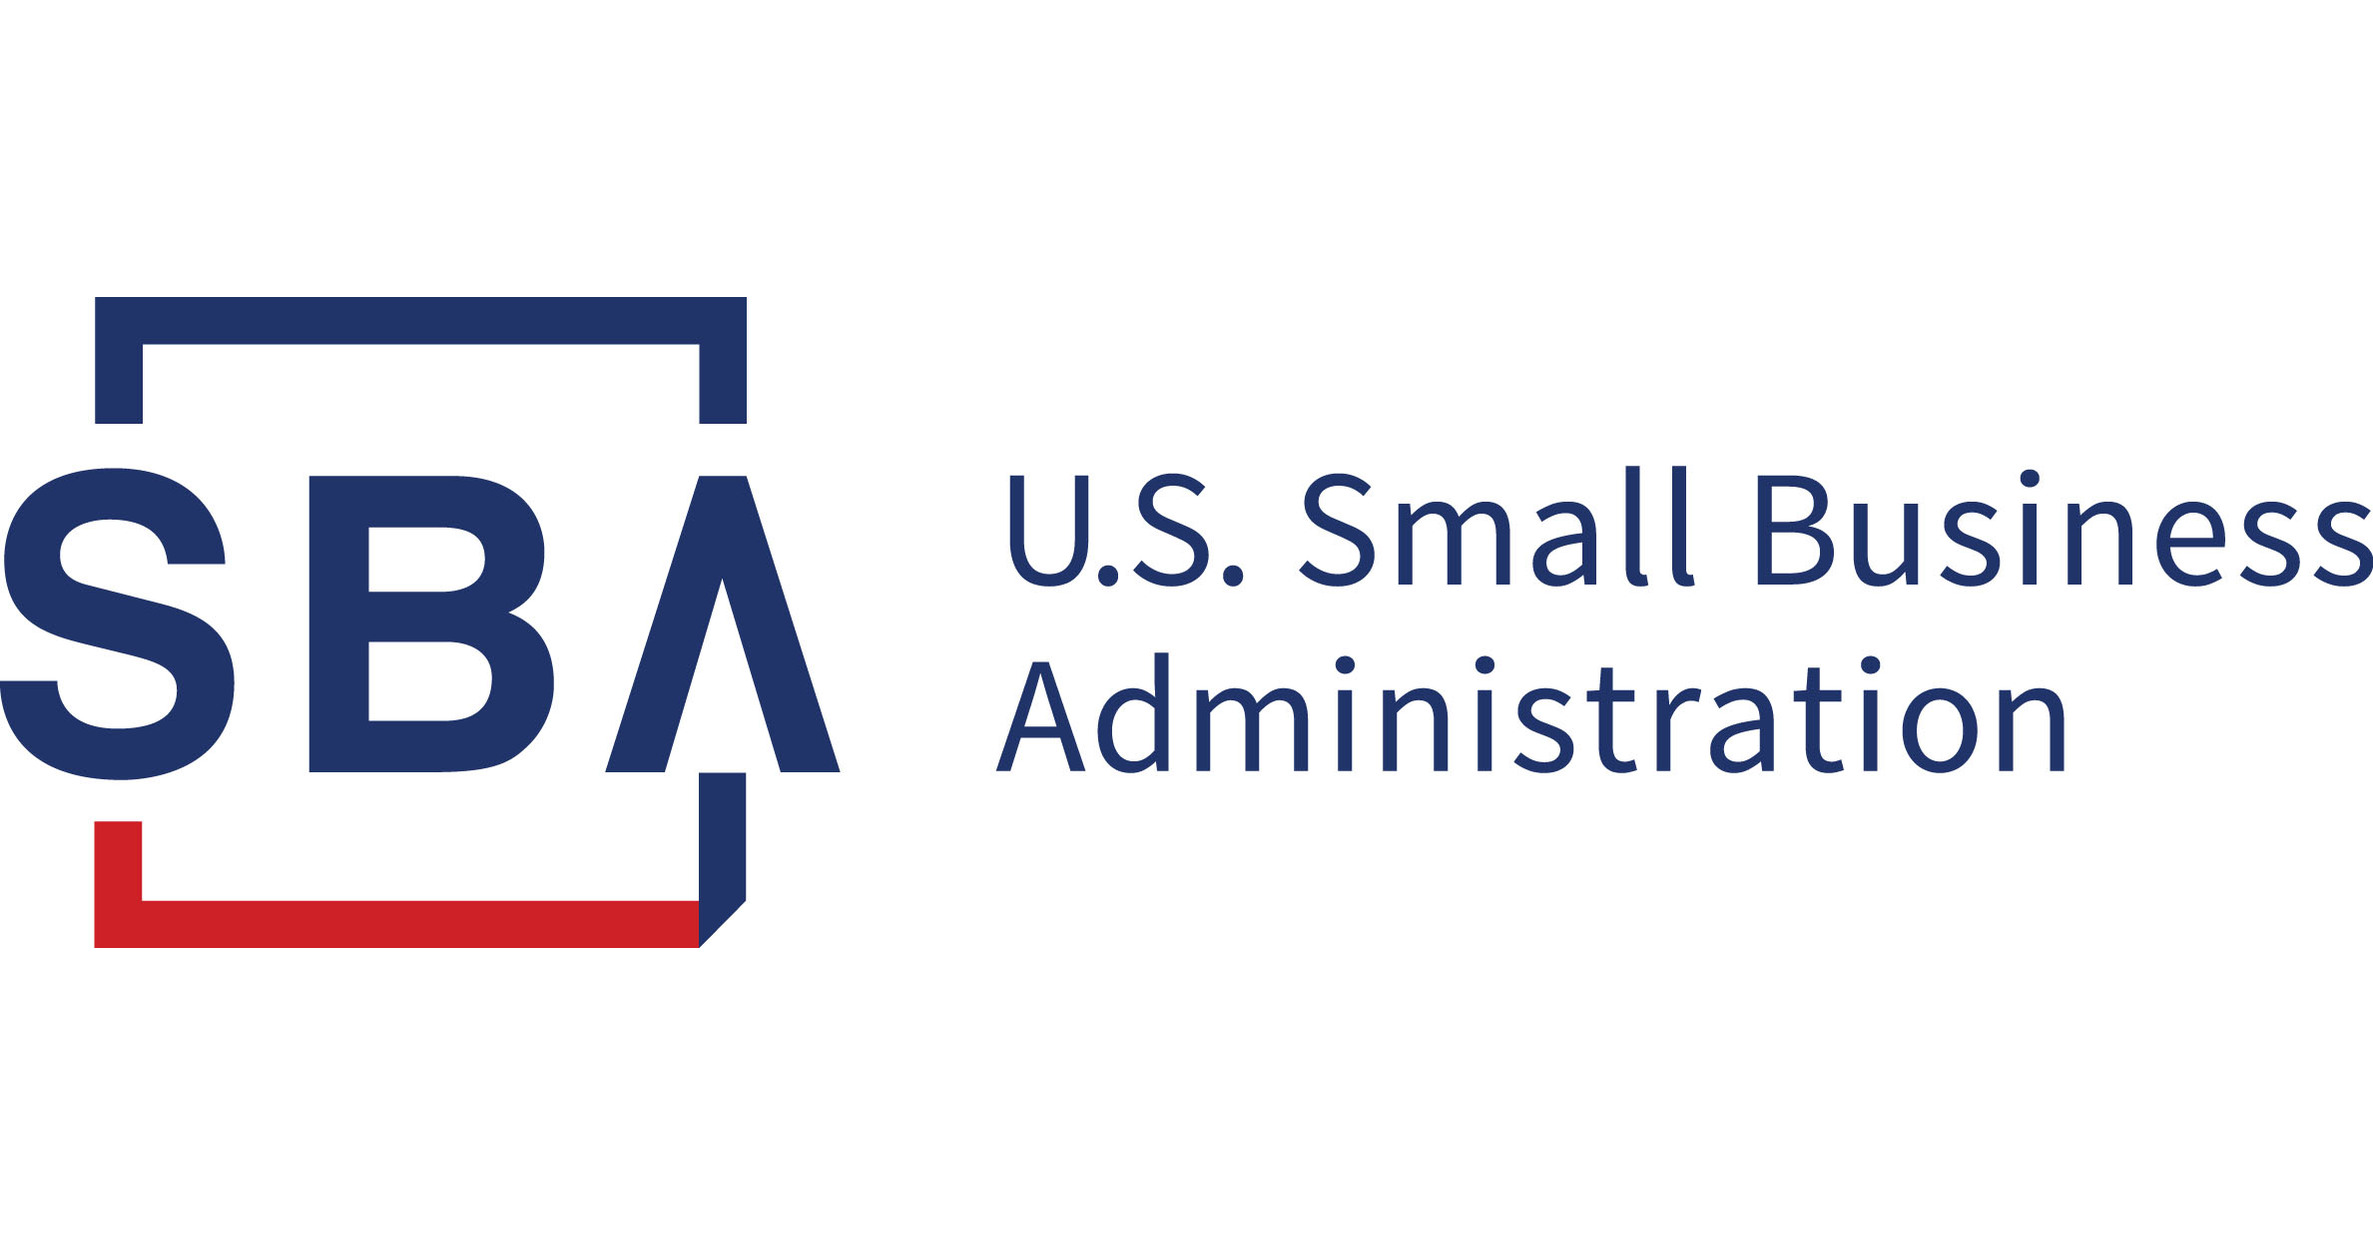 Image for SBA Administrator Guzman Announces the Launch of Inaugural America’s Seed Fund Expo Competition for Small Businesses, Startups and Inventors, using SBIR Developed Technology